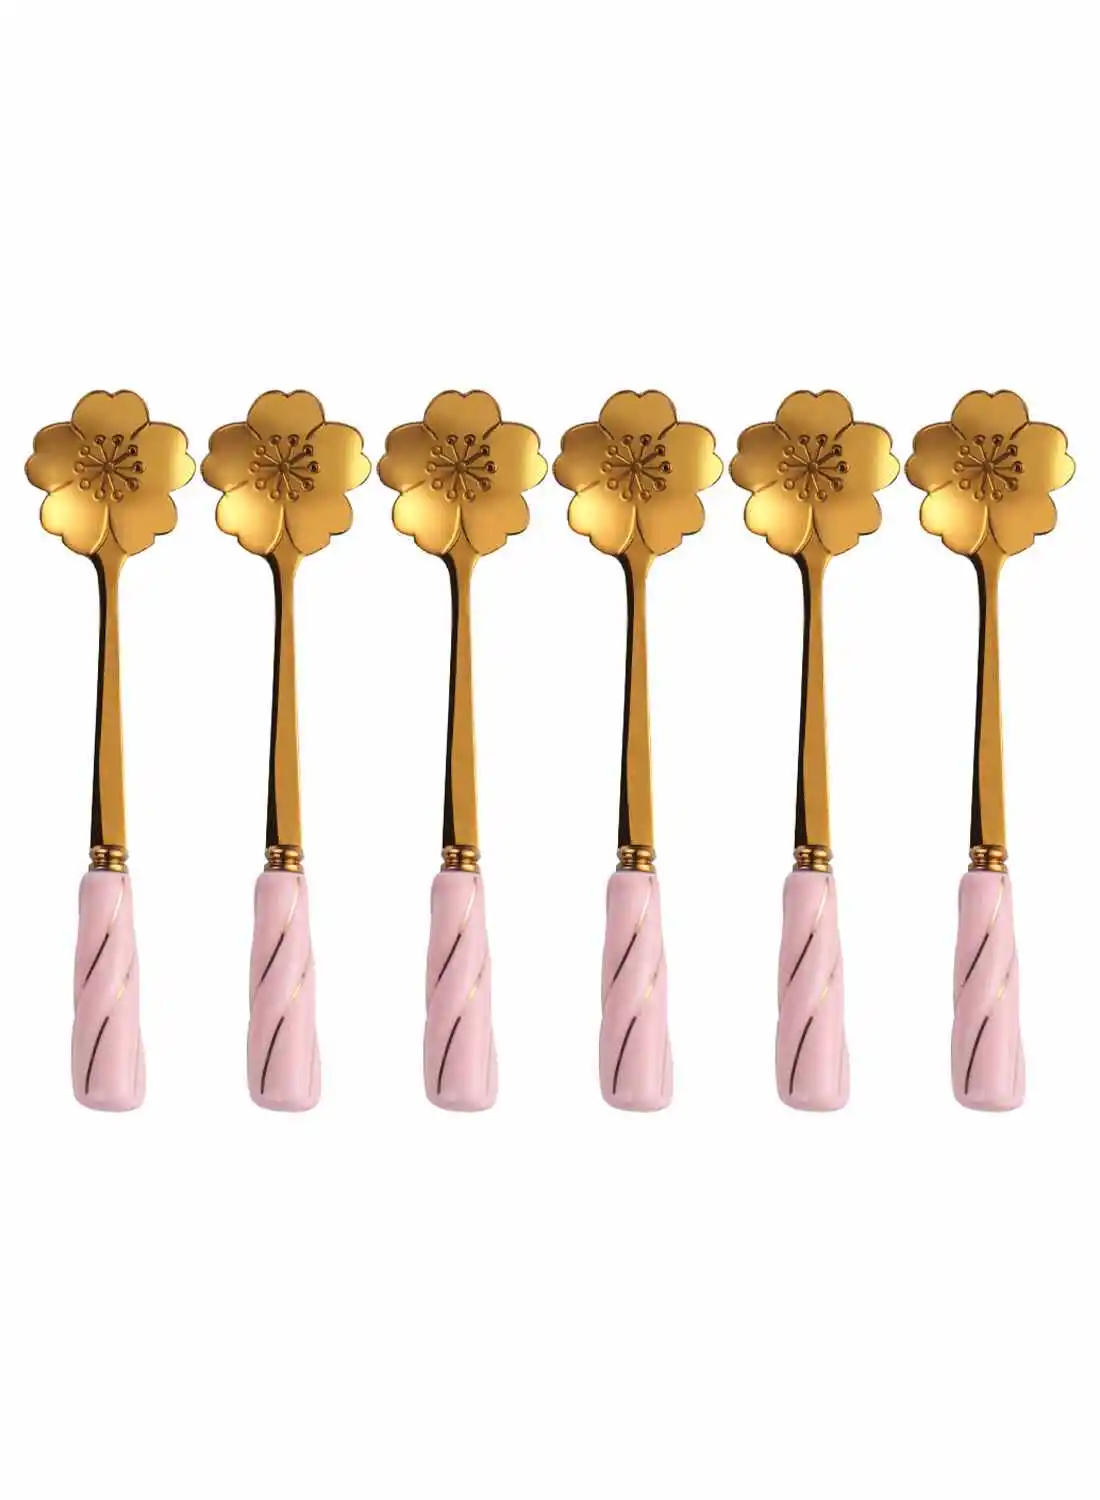 TD HOME 6-Piece Cherry Flower Shaped Mixing Spoon Set Gold/Pink 12 x 2.8centimeter